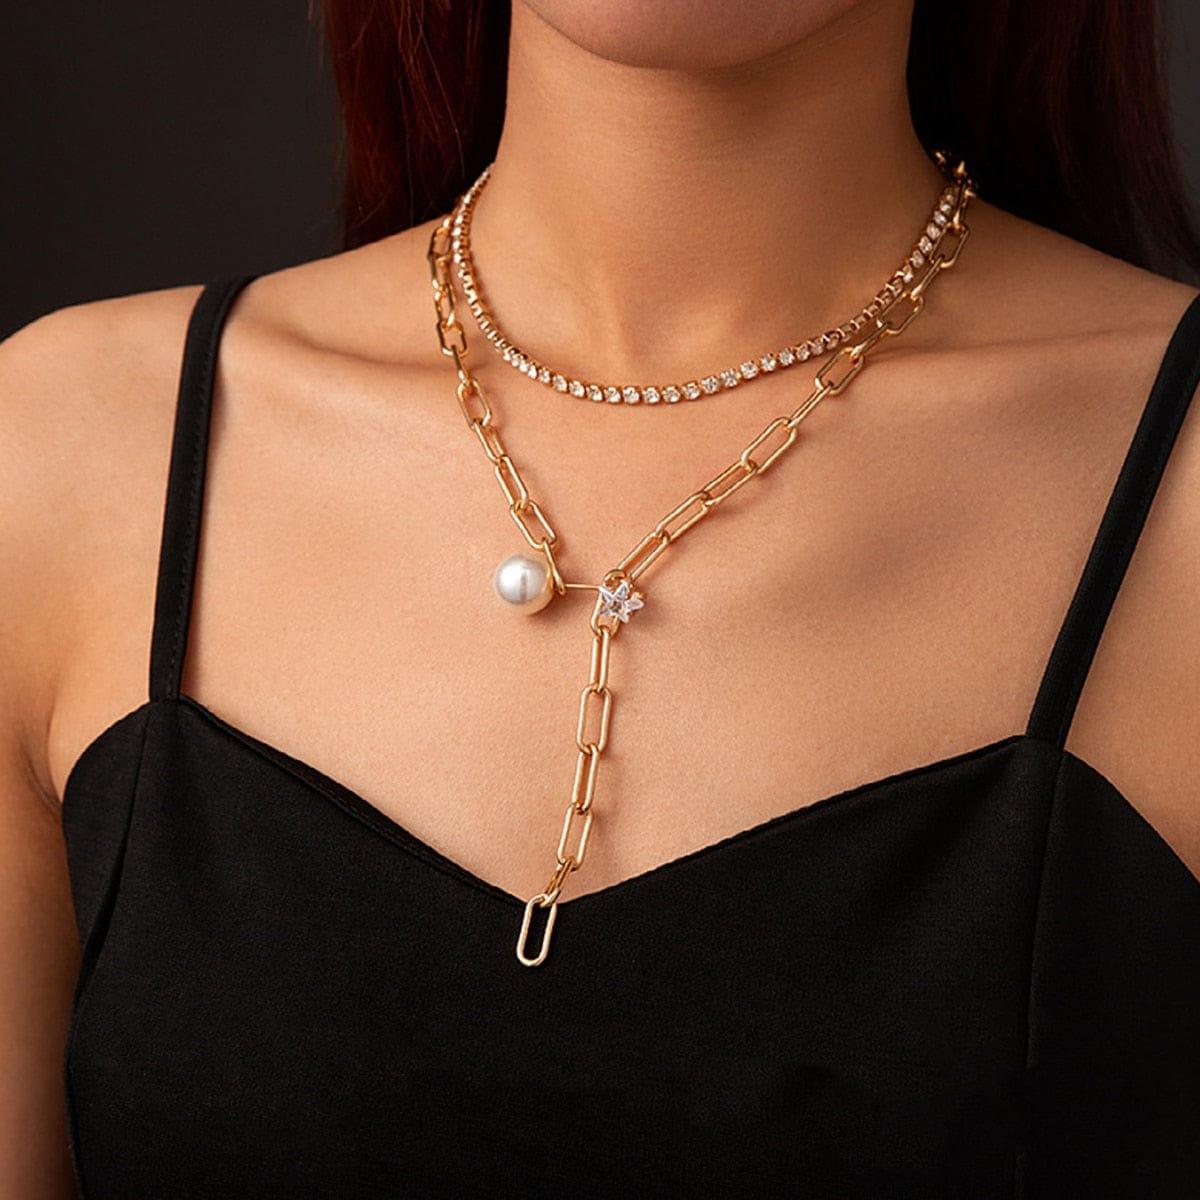 Madelynn necklace - VERSO QUALITY MATERIALS